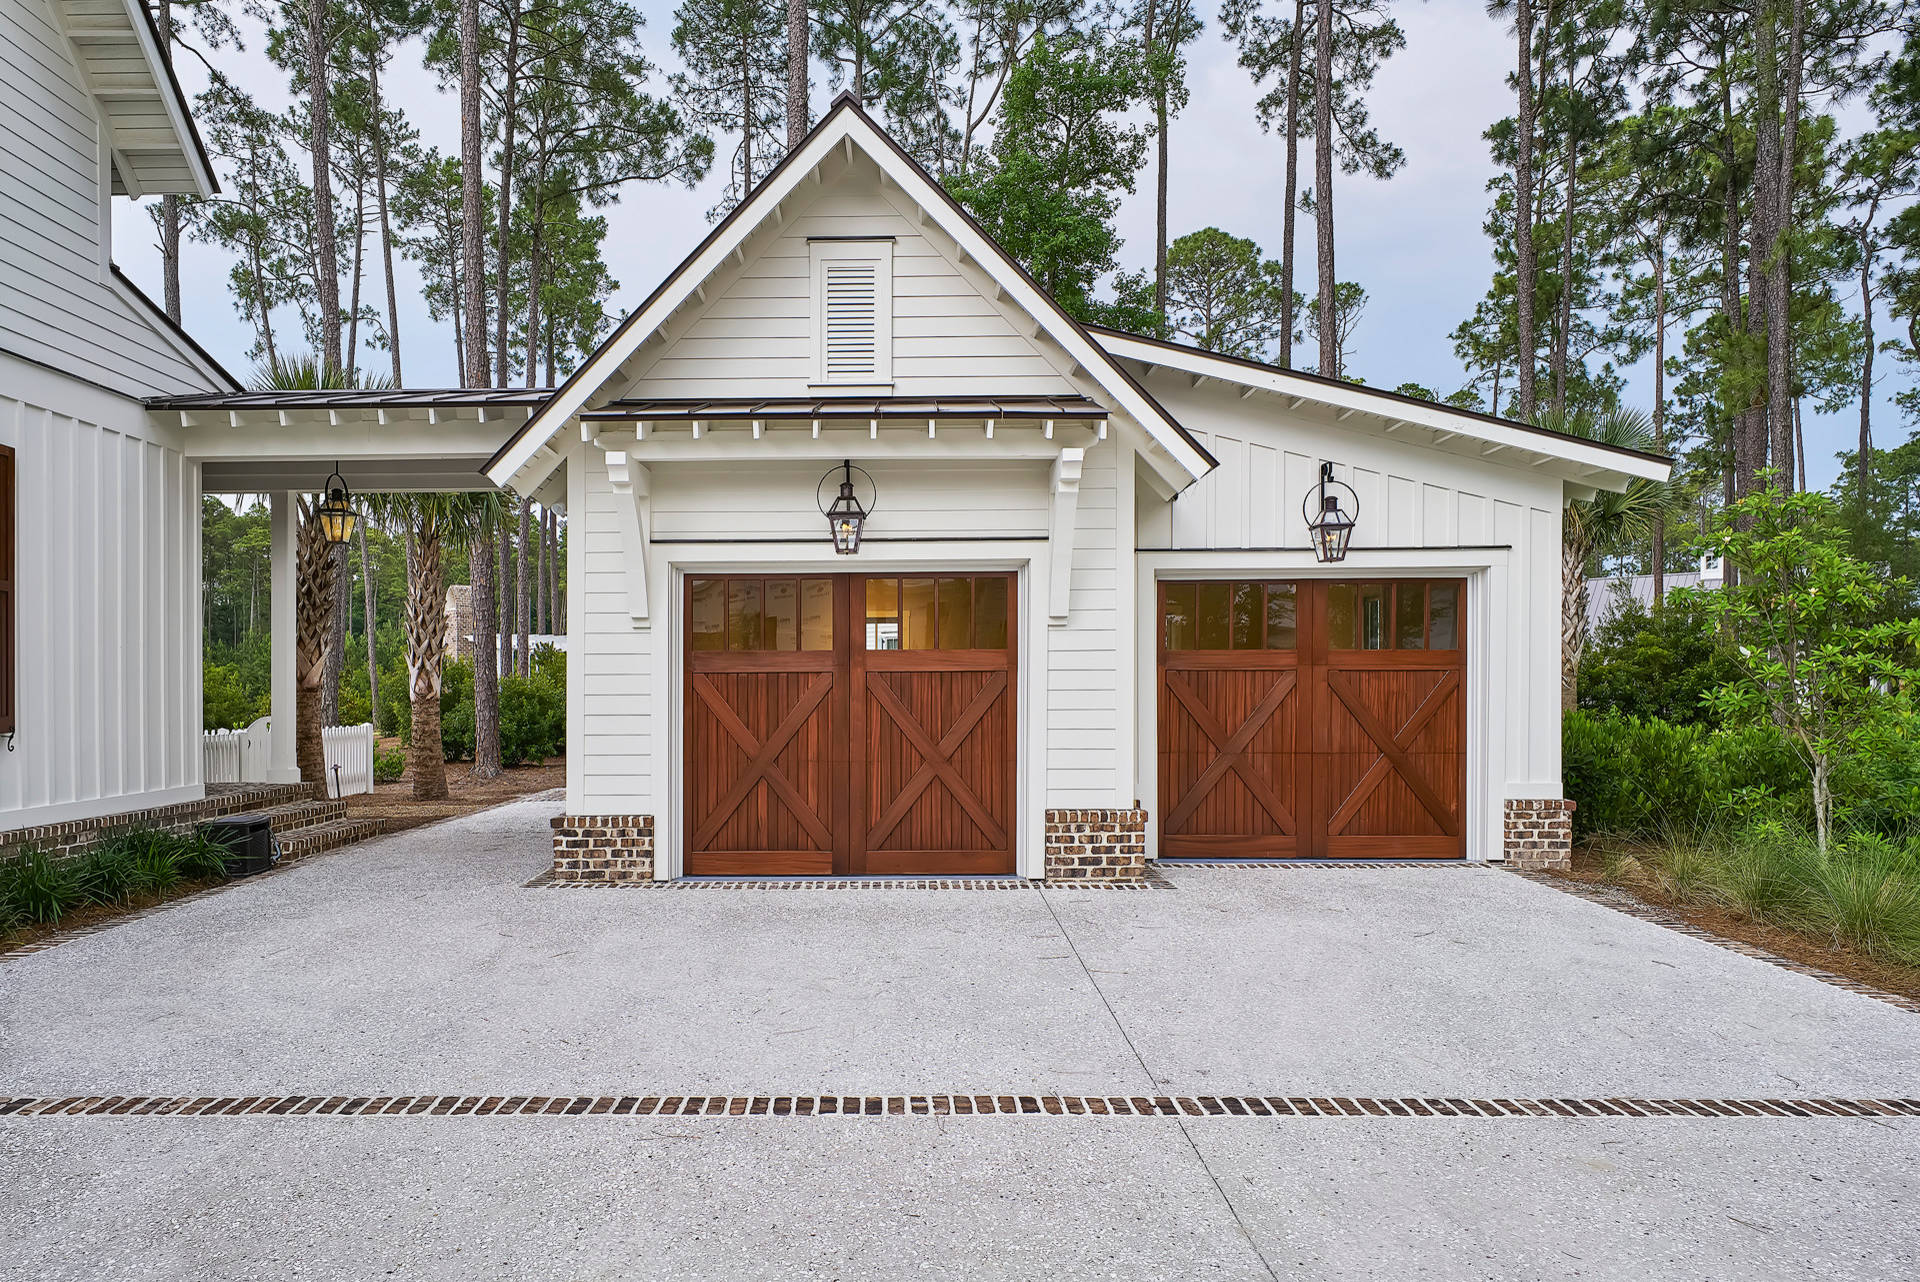 75 Beautiful Garage Pictures & Ideas